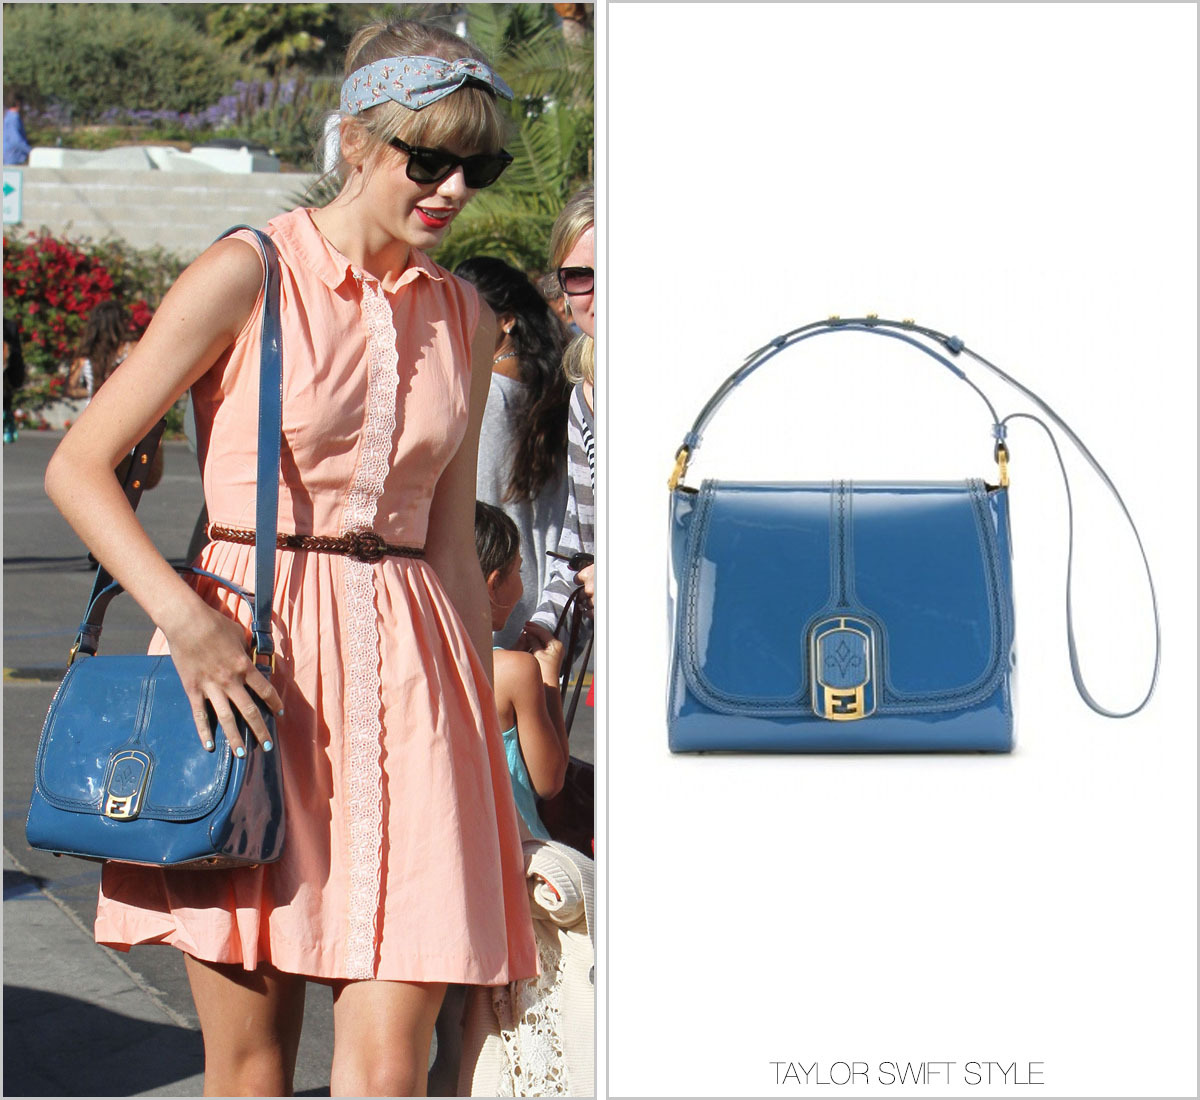 Celebs Carry Dior to a New Bag Launch & Taylor Swift Diversifies